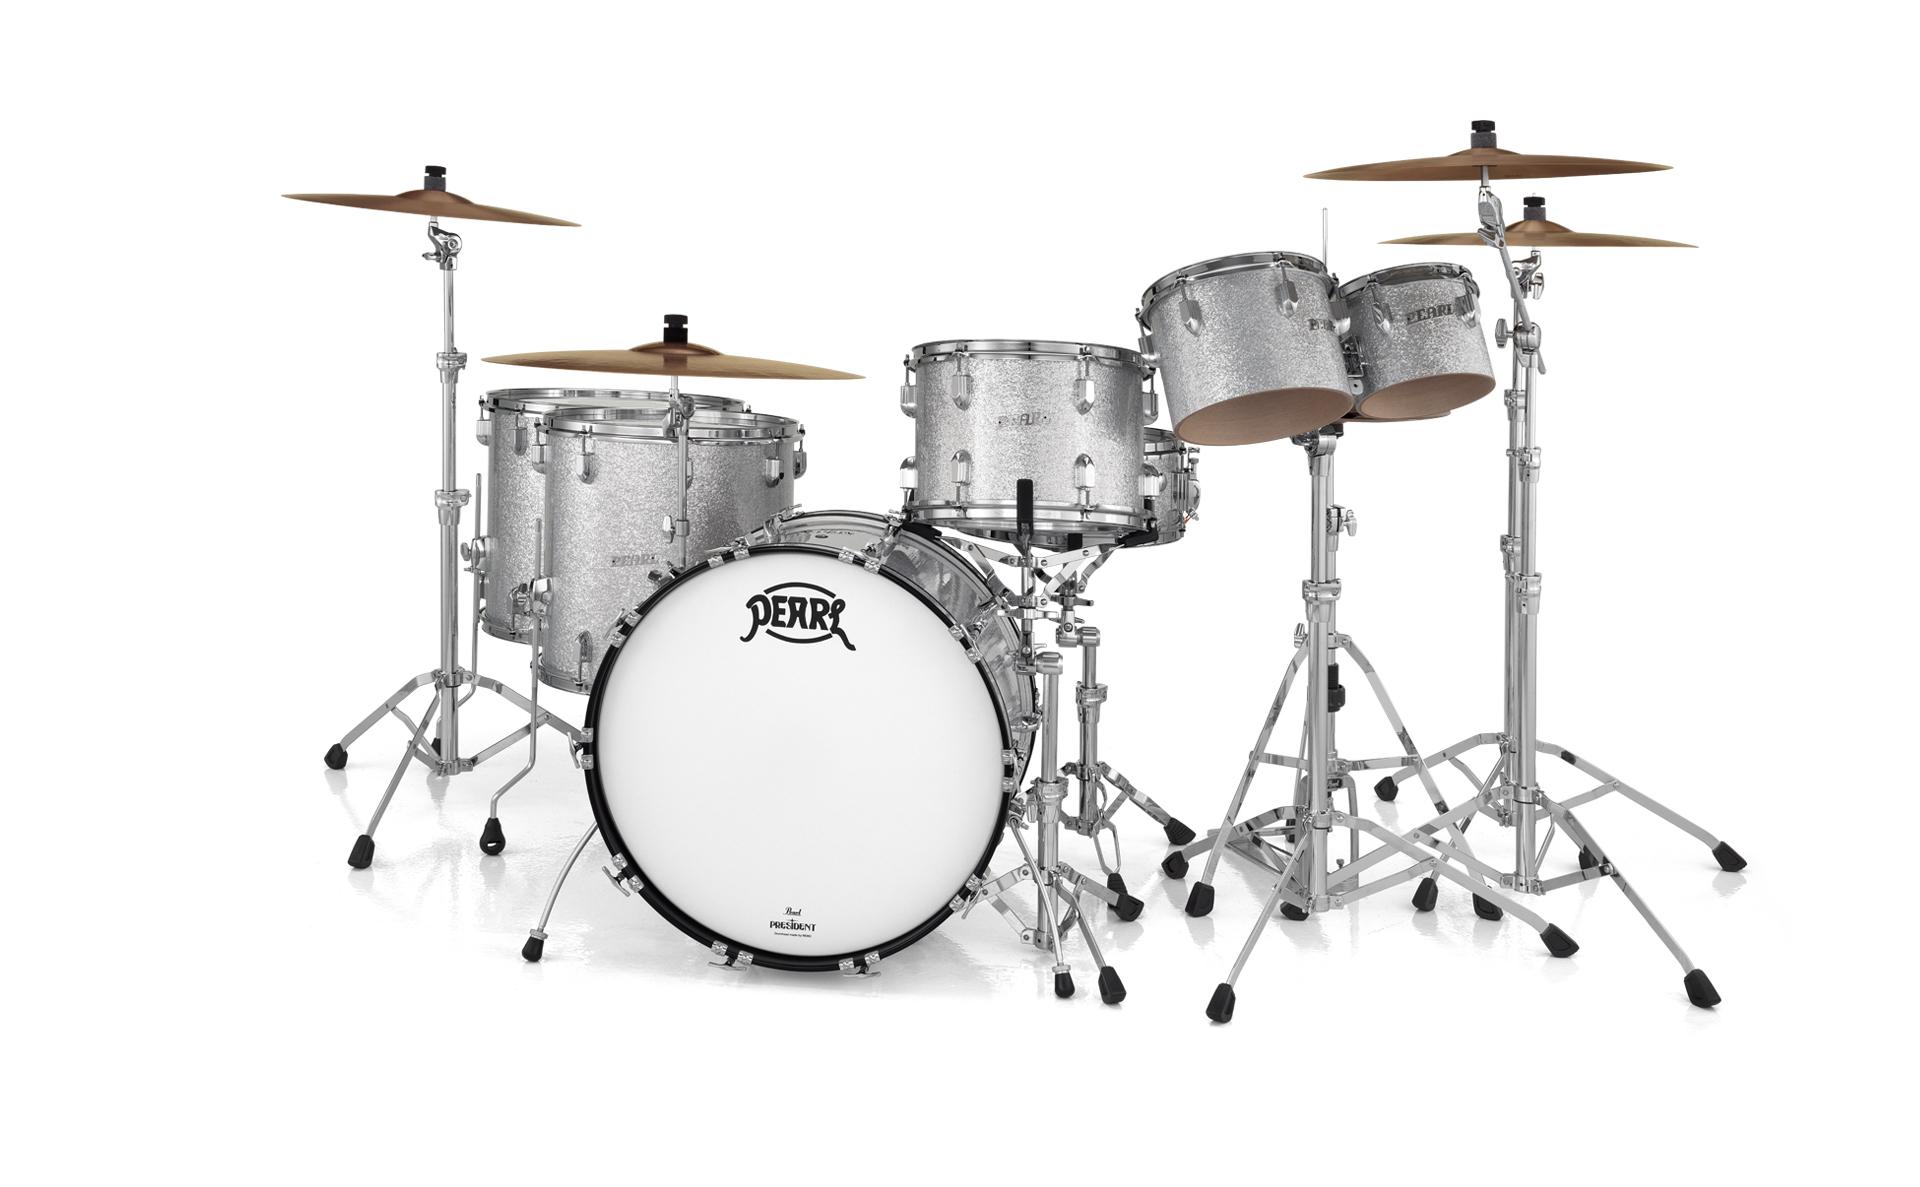 President Series Deluxe | Pearl Drums -Official site-